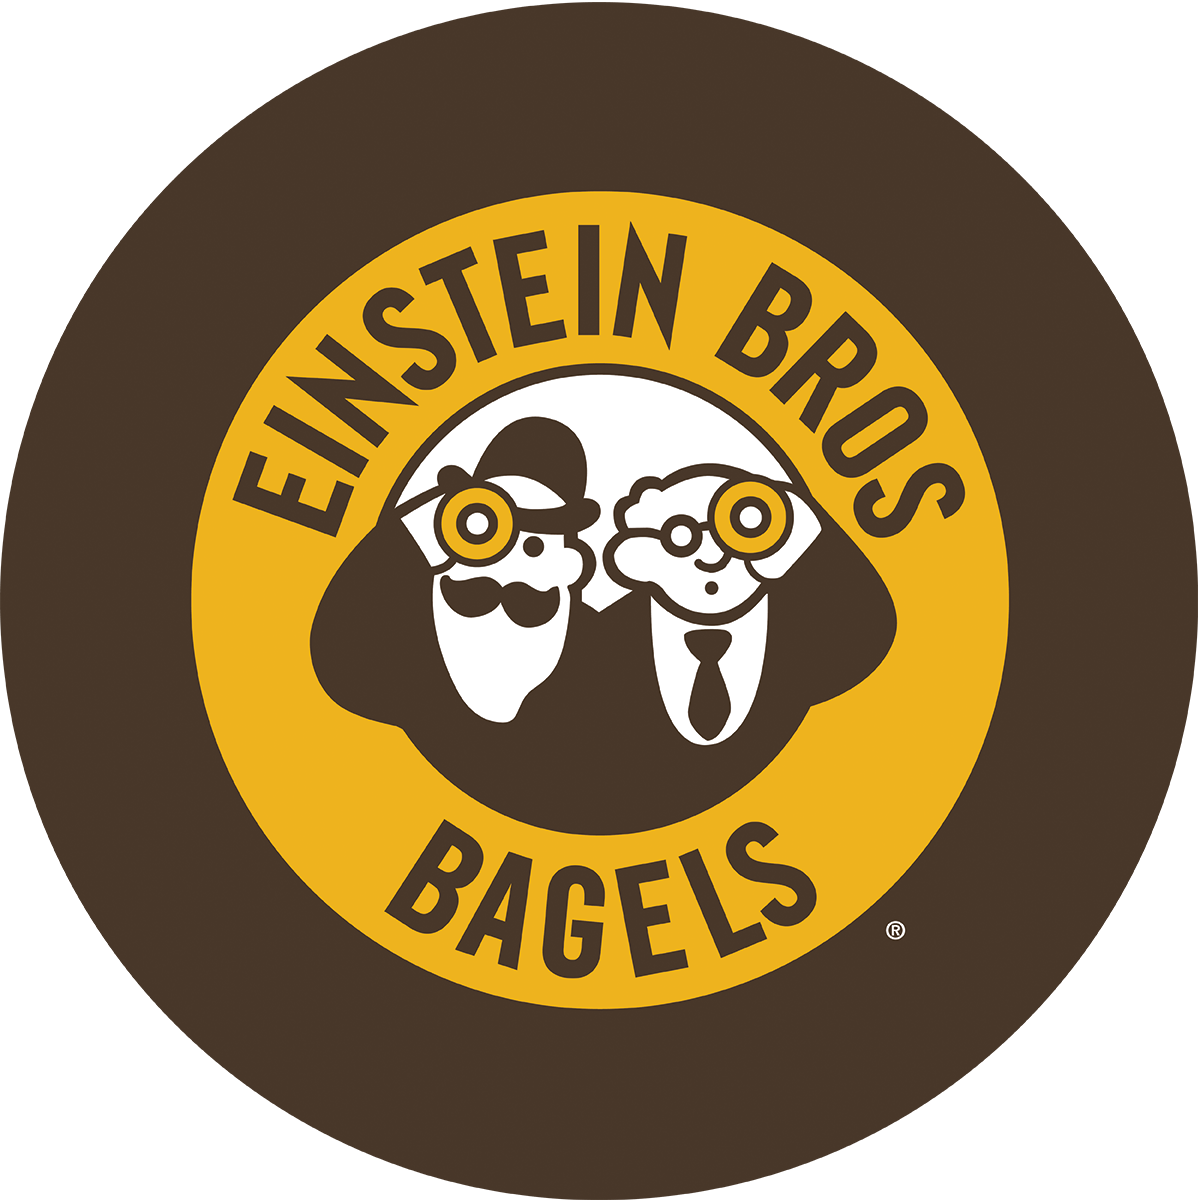 Einstein Bros. Bagels Launches Freshest Home Bagels with Take & Toast Line to Celebrate National Bagel Day